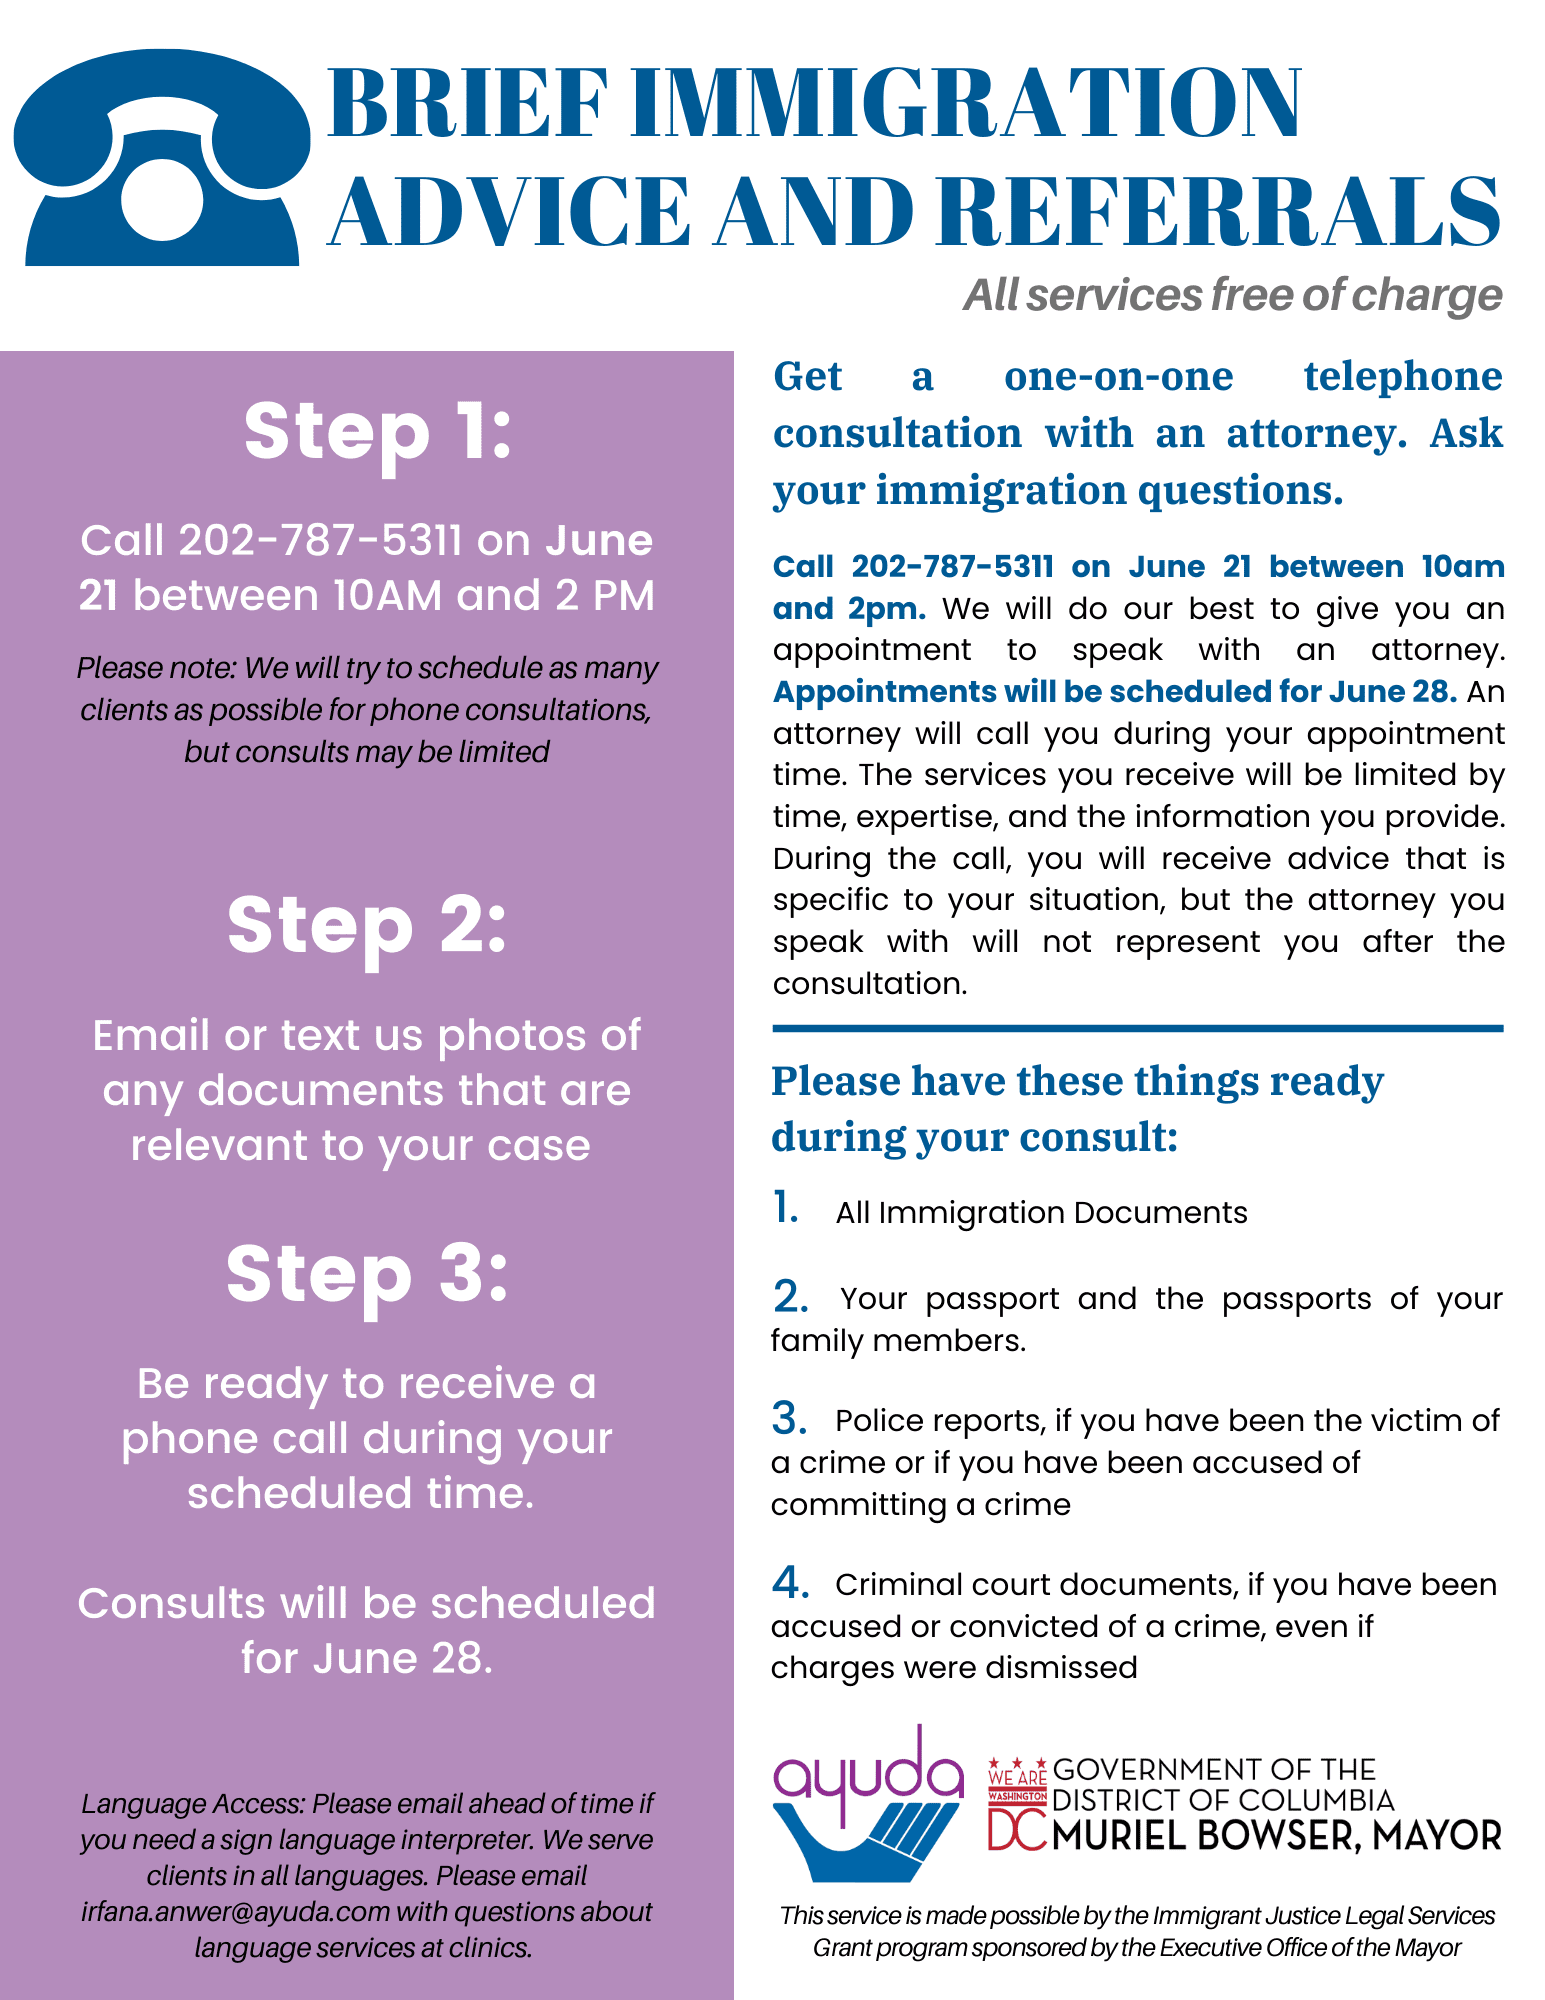 English-language flyer for Ayuda’s June 2024 call-in brief immigration advice clinic.